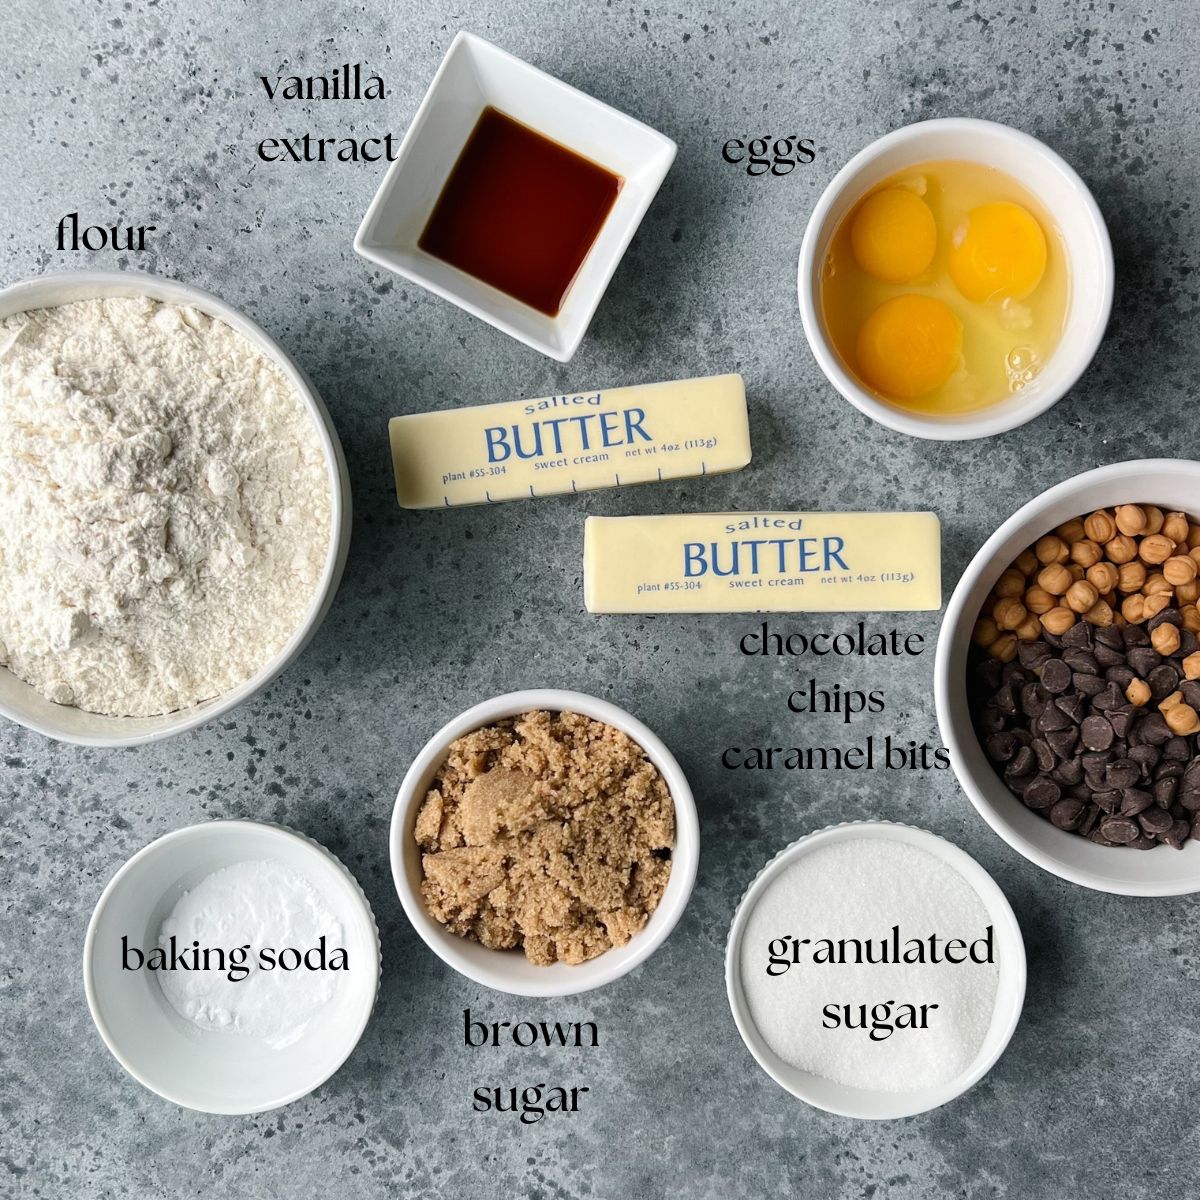 Ingredients needed for caramel chocolate chip cookies: flour, vanilla extract, eggs, butter, semi-sweet chocolate chips, caramel bits, granulated sugar, brown sugar, baking soda.